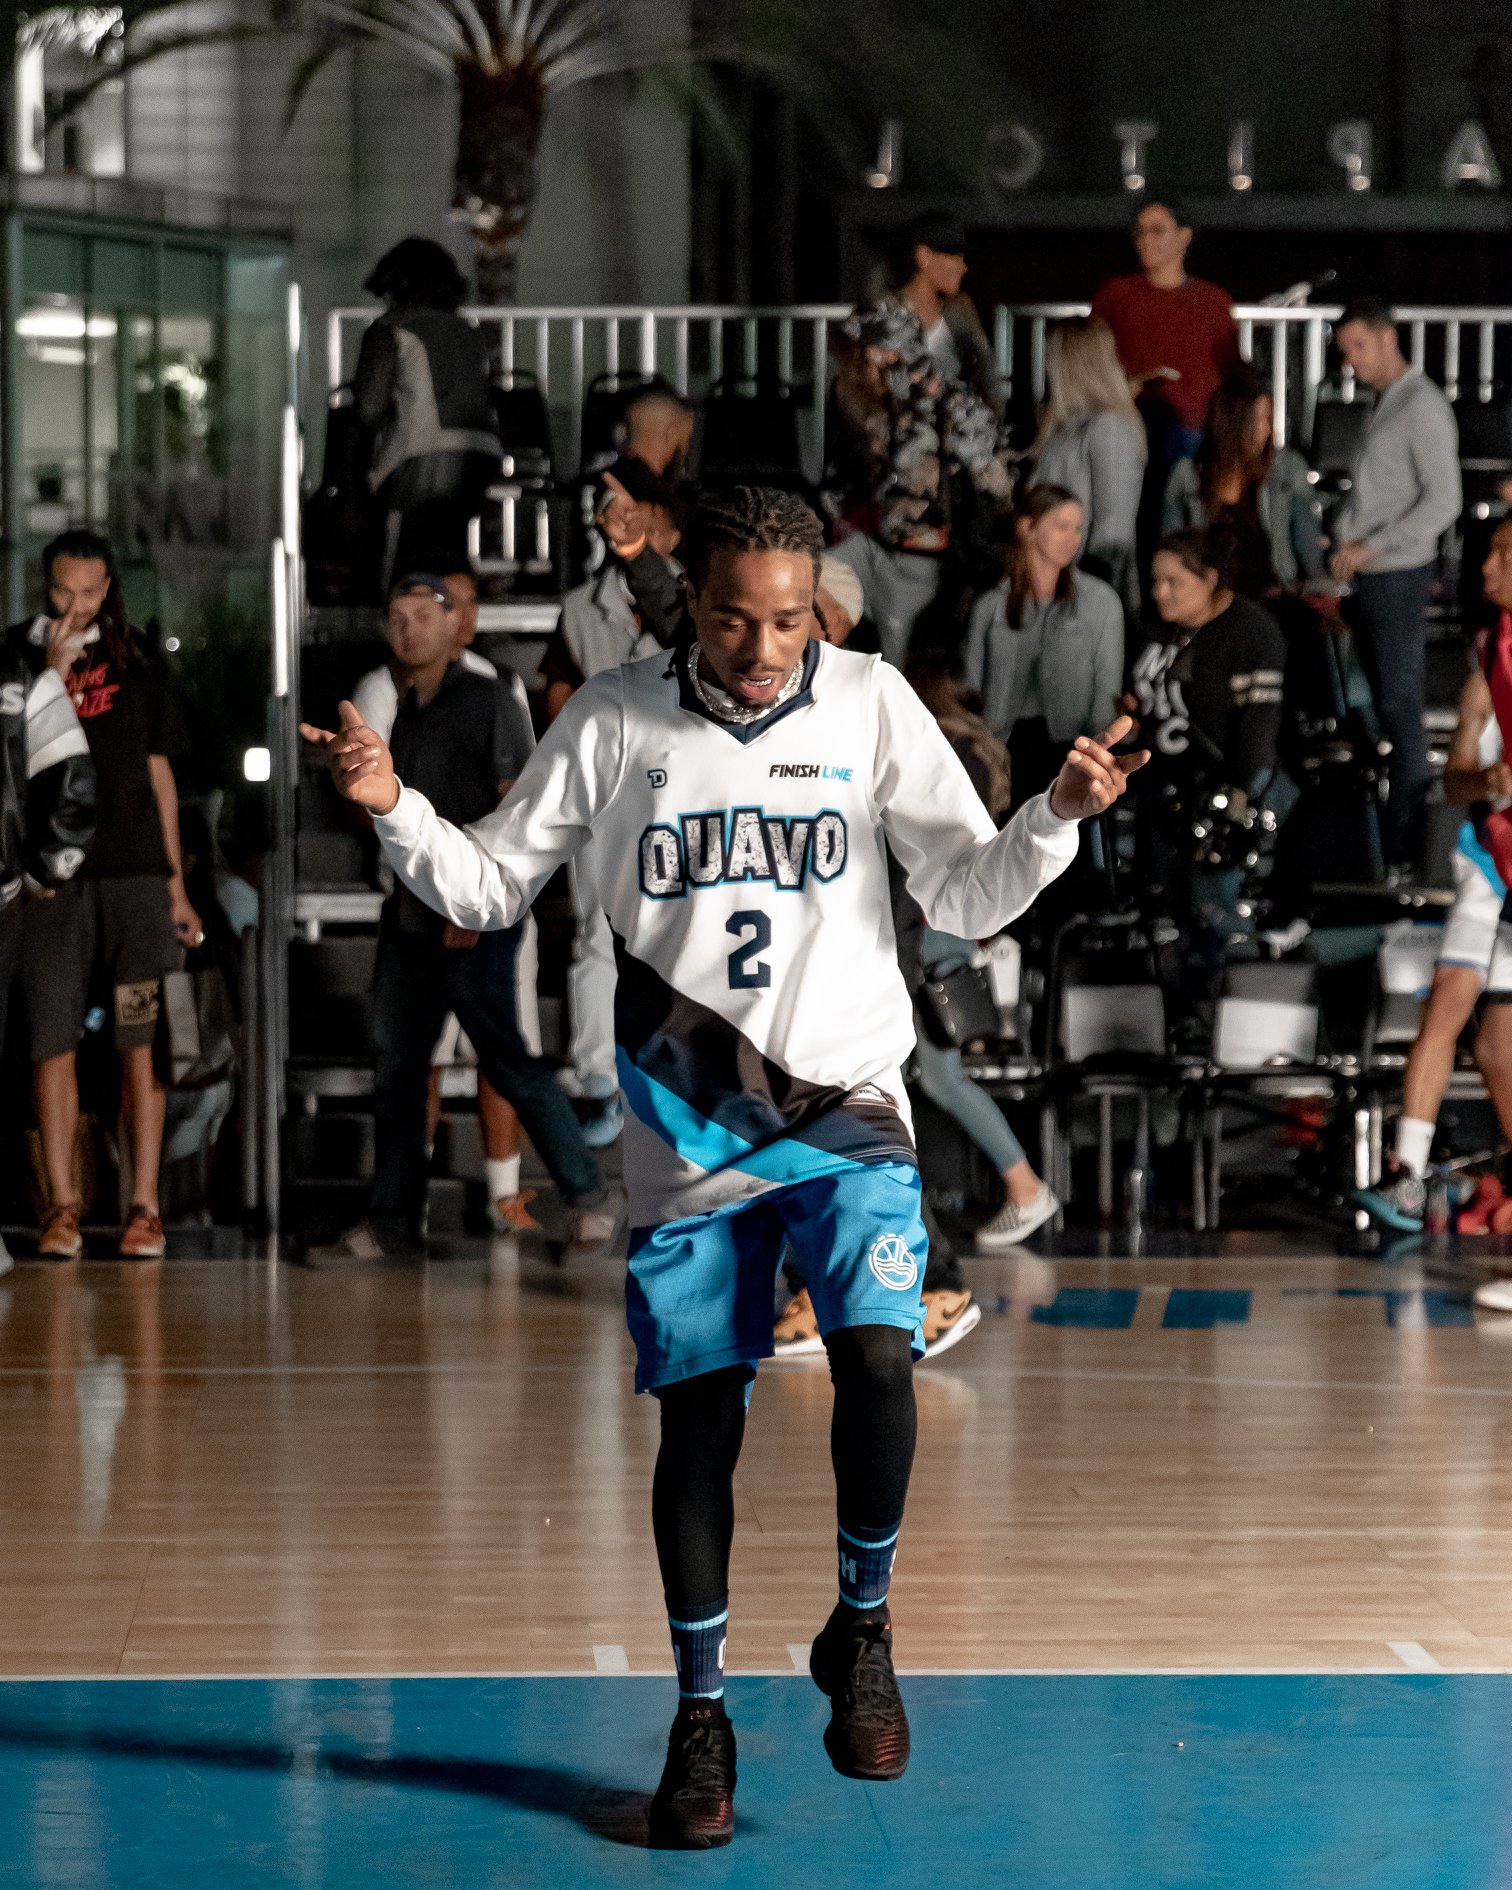 Quavo Incorporates His Love For Hoops And Hip-Hop For ‘Huncho Hoops’ With The VBL(via Uproxx)